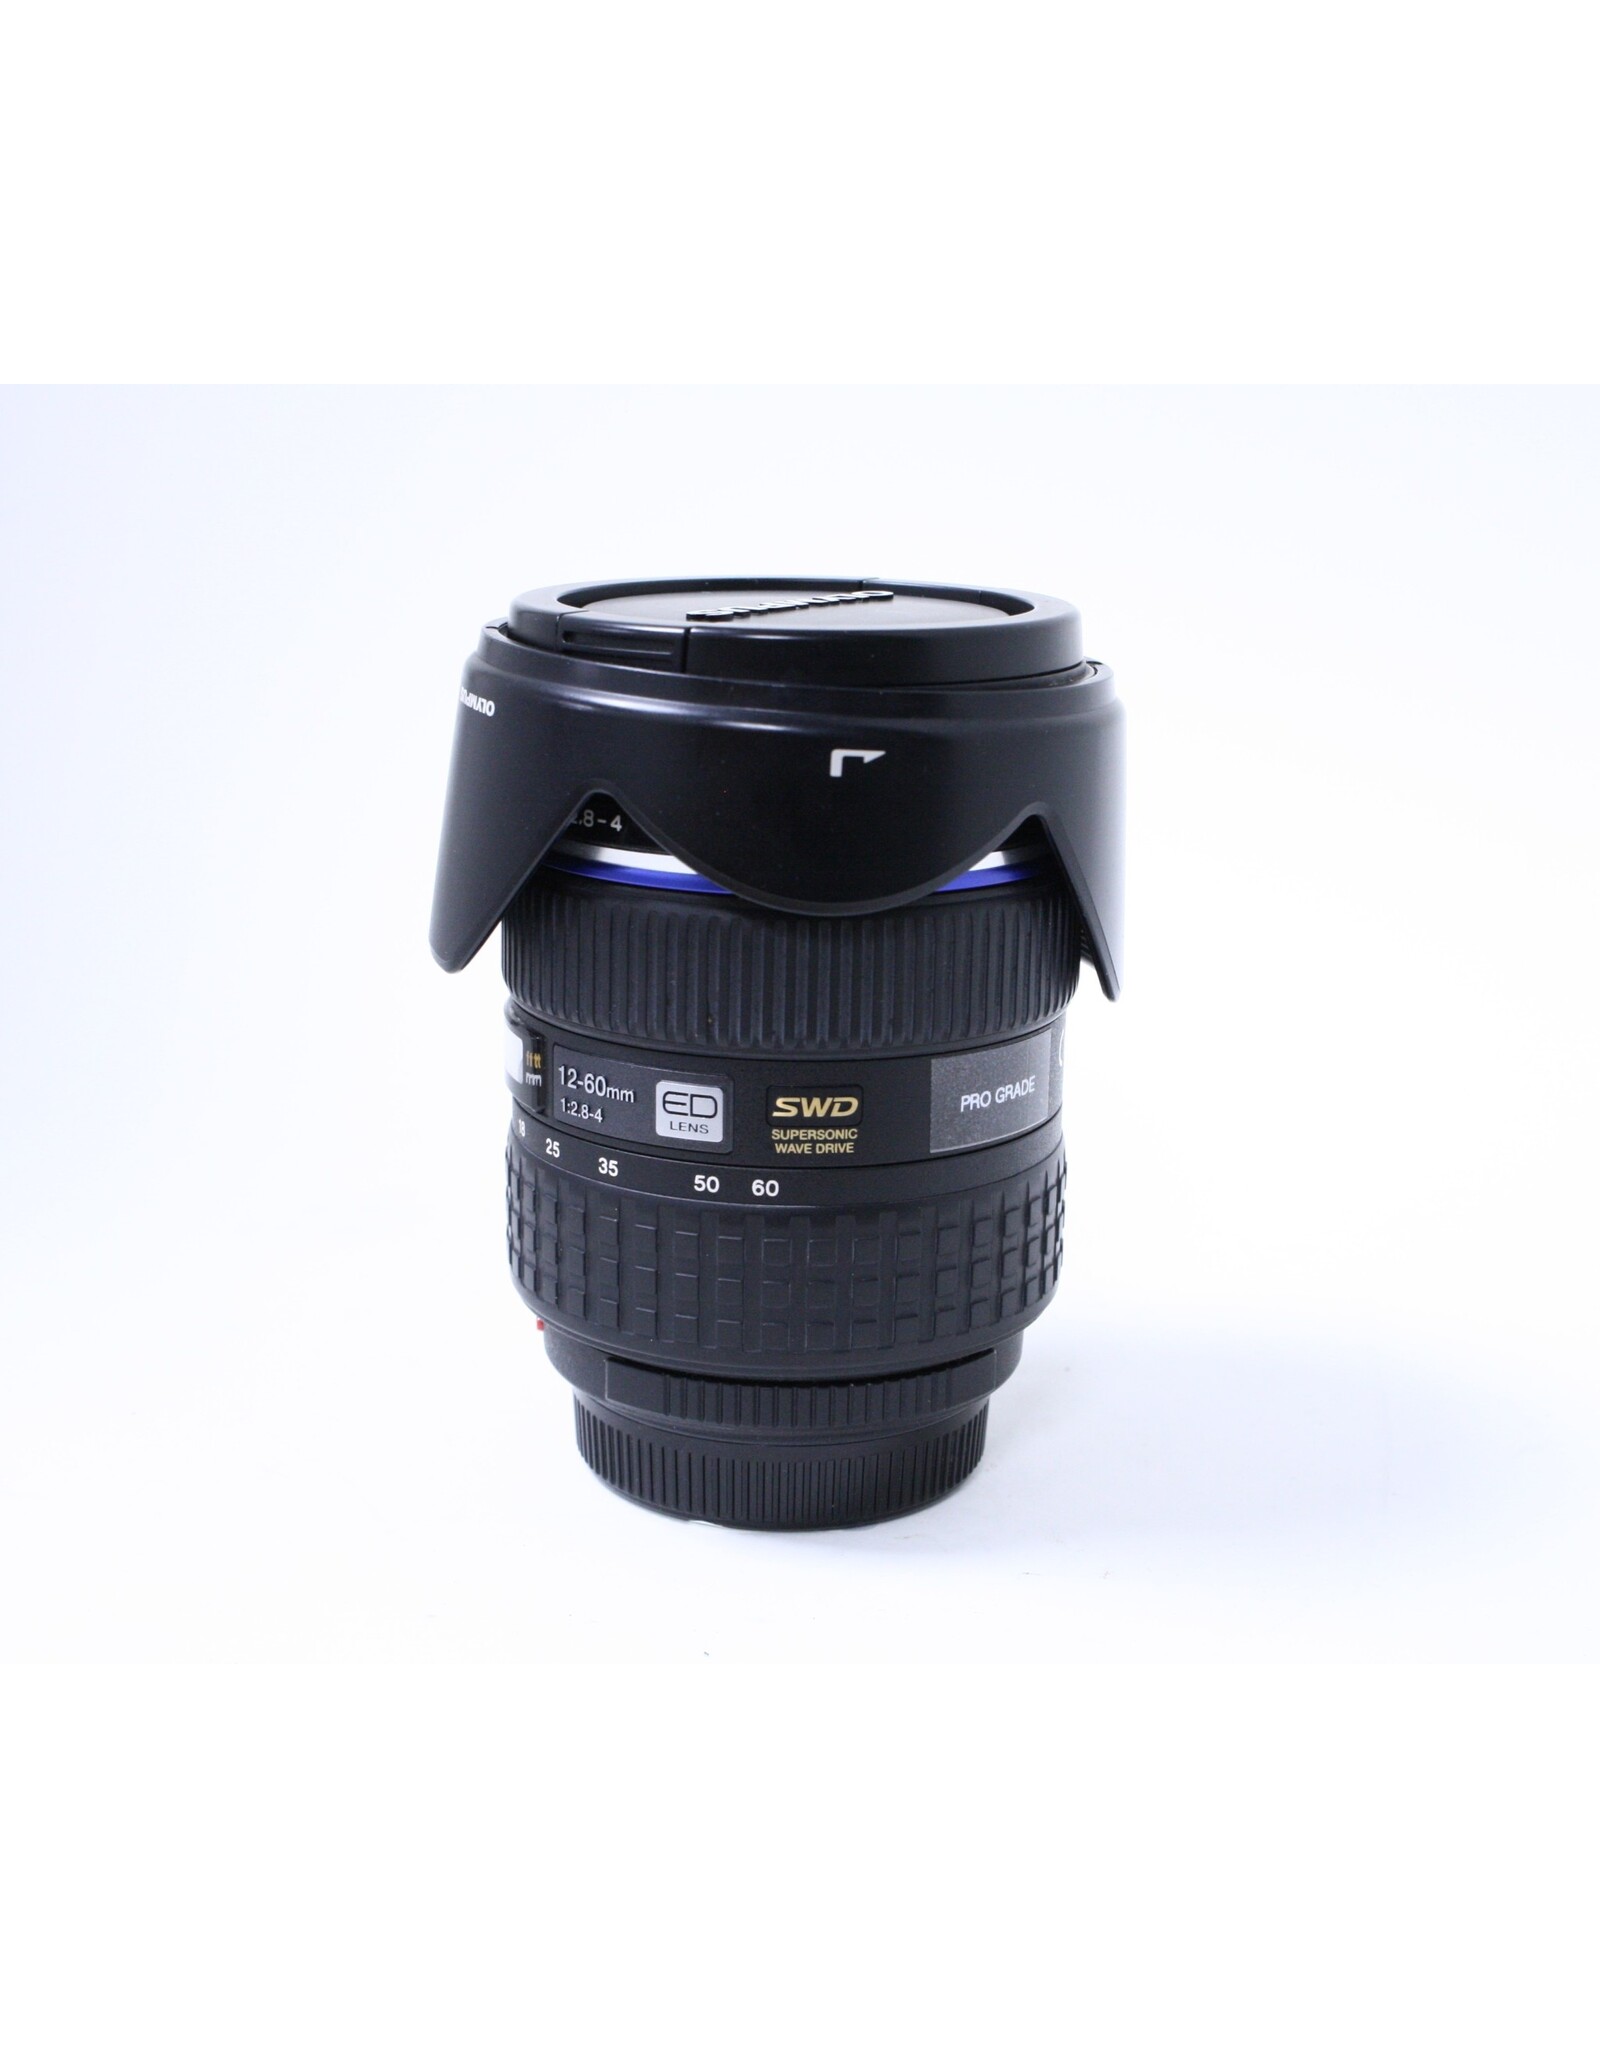 Olympus 12-60mm f2.8-4 Four-Thirds Lens (Pre-owned)